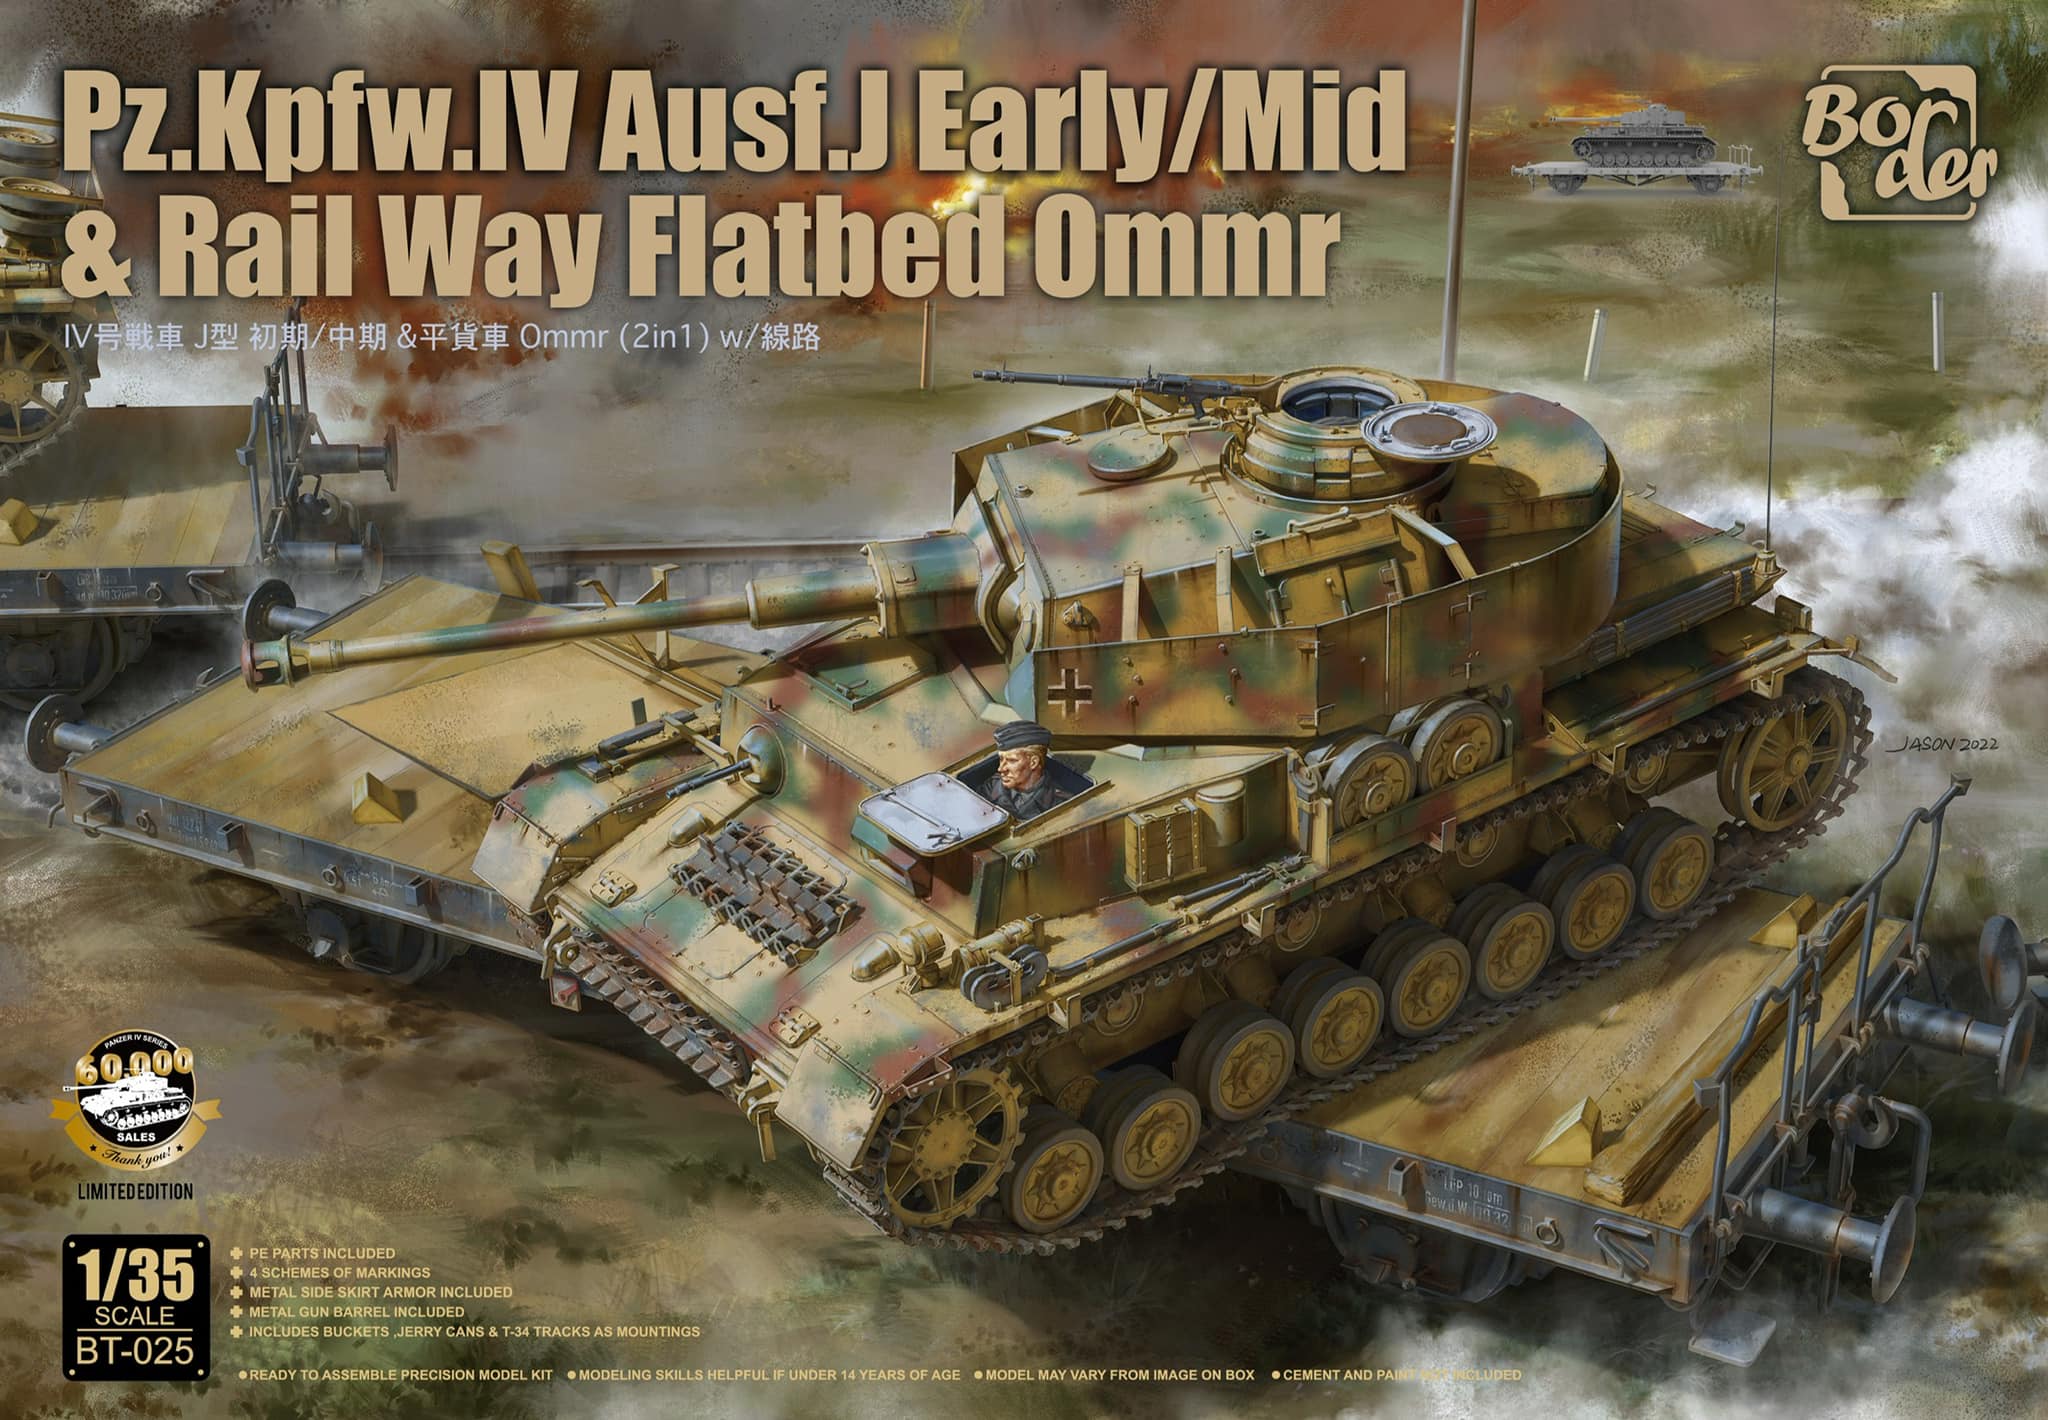 Pz.Kpfw.IV Ausf. J Early/Mid & Railway Flatbed Ommr - Limited Edition